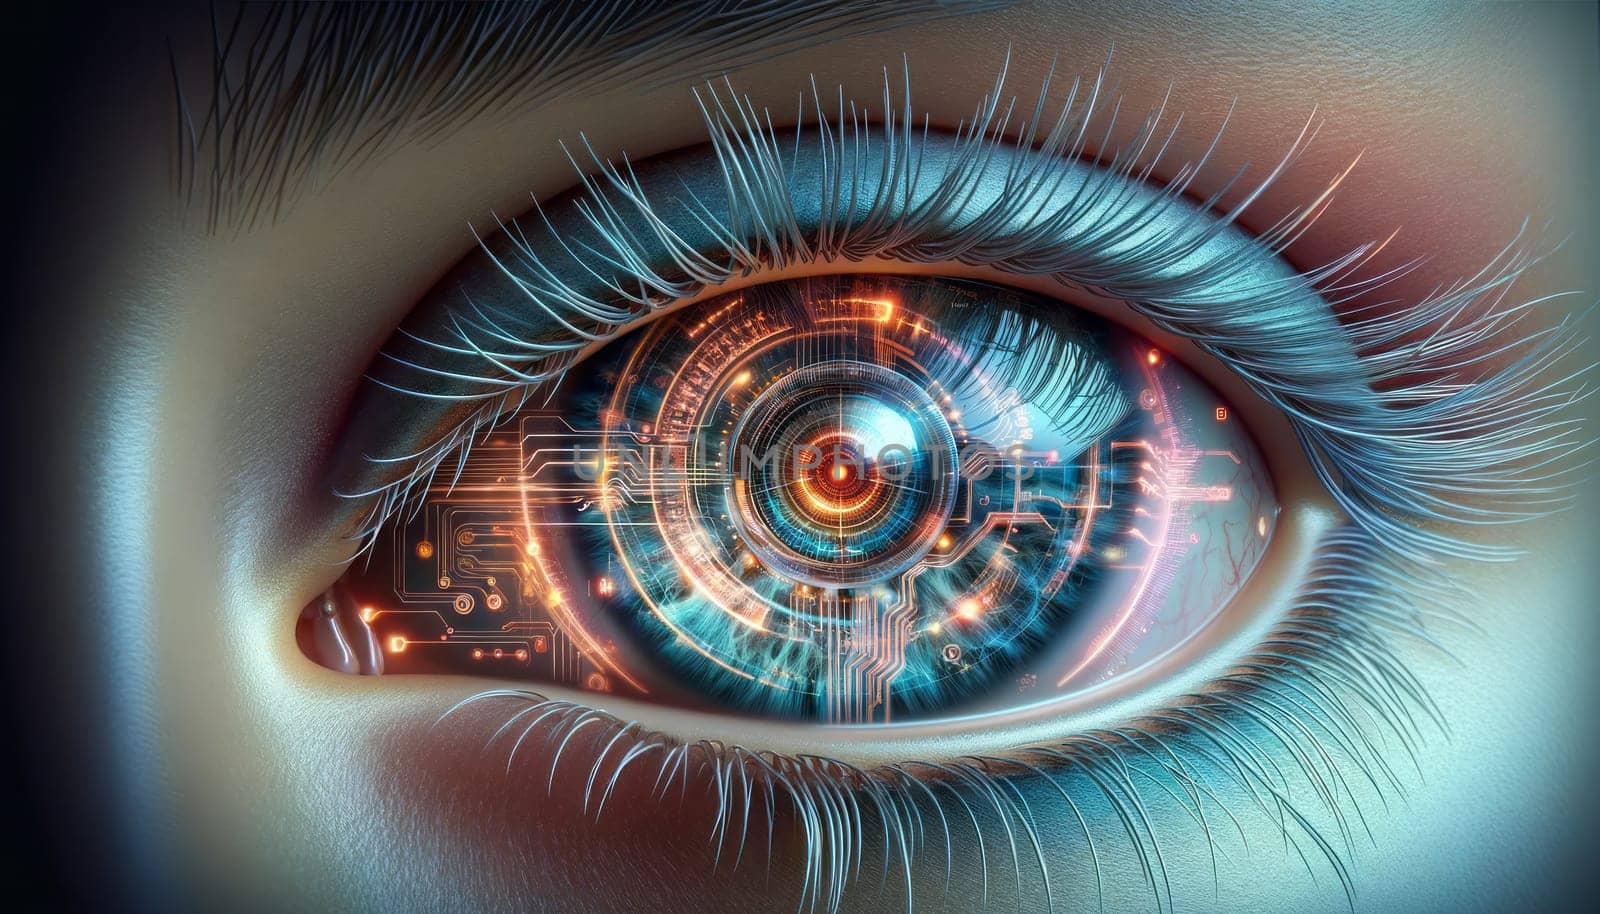 A close-up digital illustration of a human eye, detailed and realistic in appearance. The iris of the eye is replaced with a glowing, intricate cybernetic interface, suggesting advanced technology integrated with human biology. The design includes elements such as circuit patterns, digital readouts, and dynamic light effects in shades of blue and orange, highlighting the fusion of the organic and the electronic. The eyelashes and skin textures are sharp and clear, adding to the realism of the image.